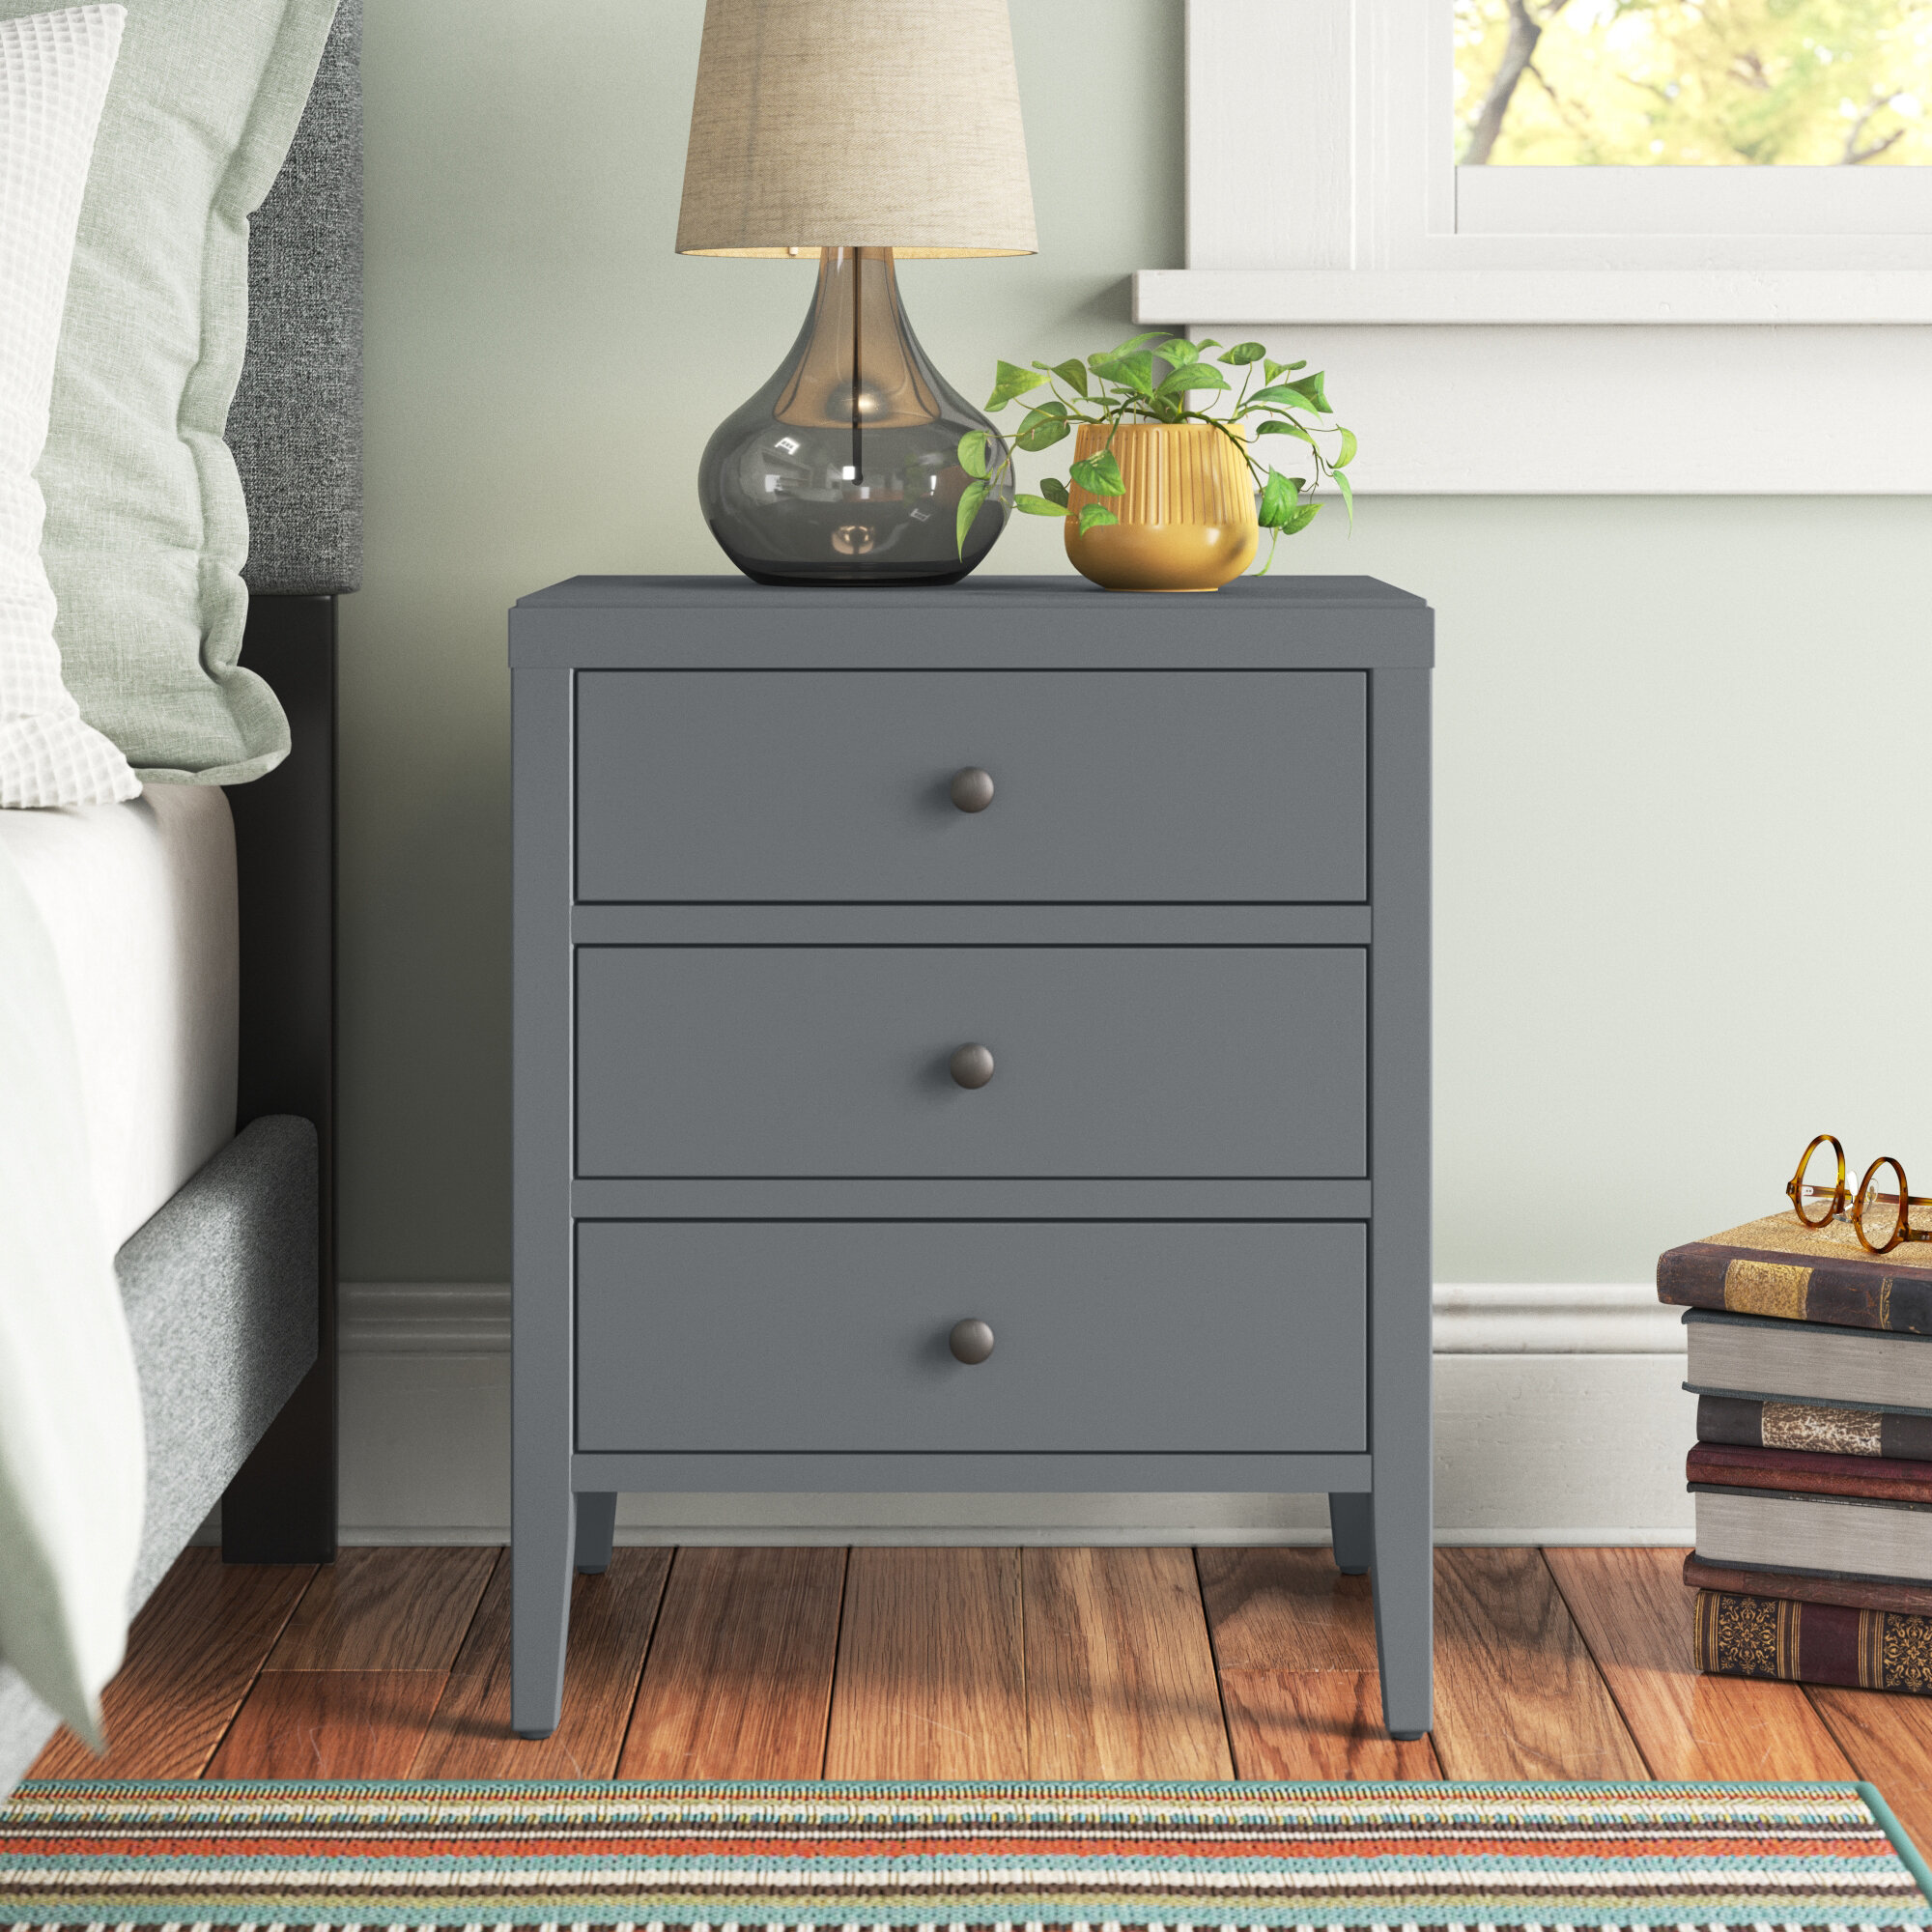 Night Accent Table 2-Drawer Antique Style Nightstand Bedroom Furniture Gray 